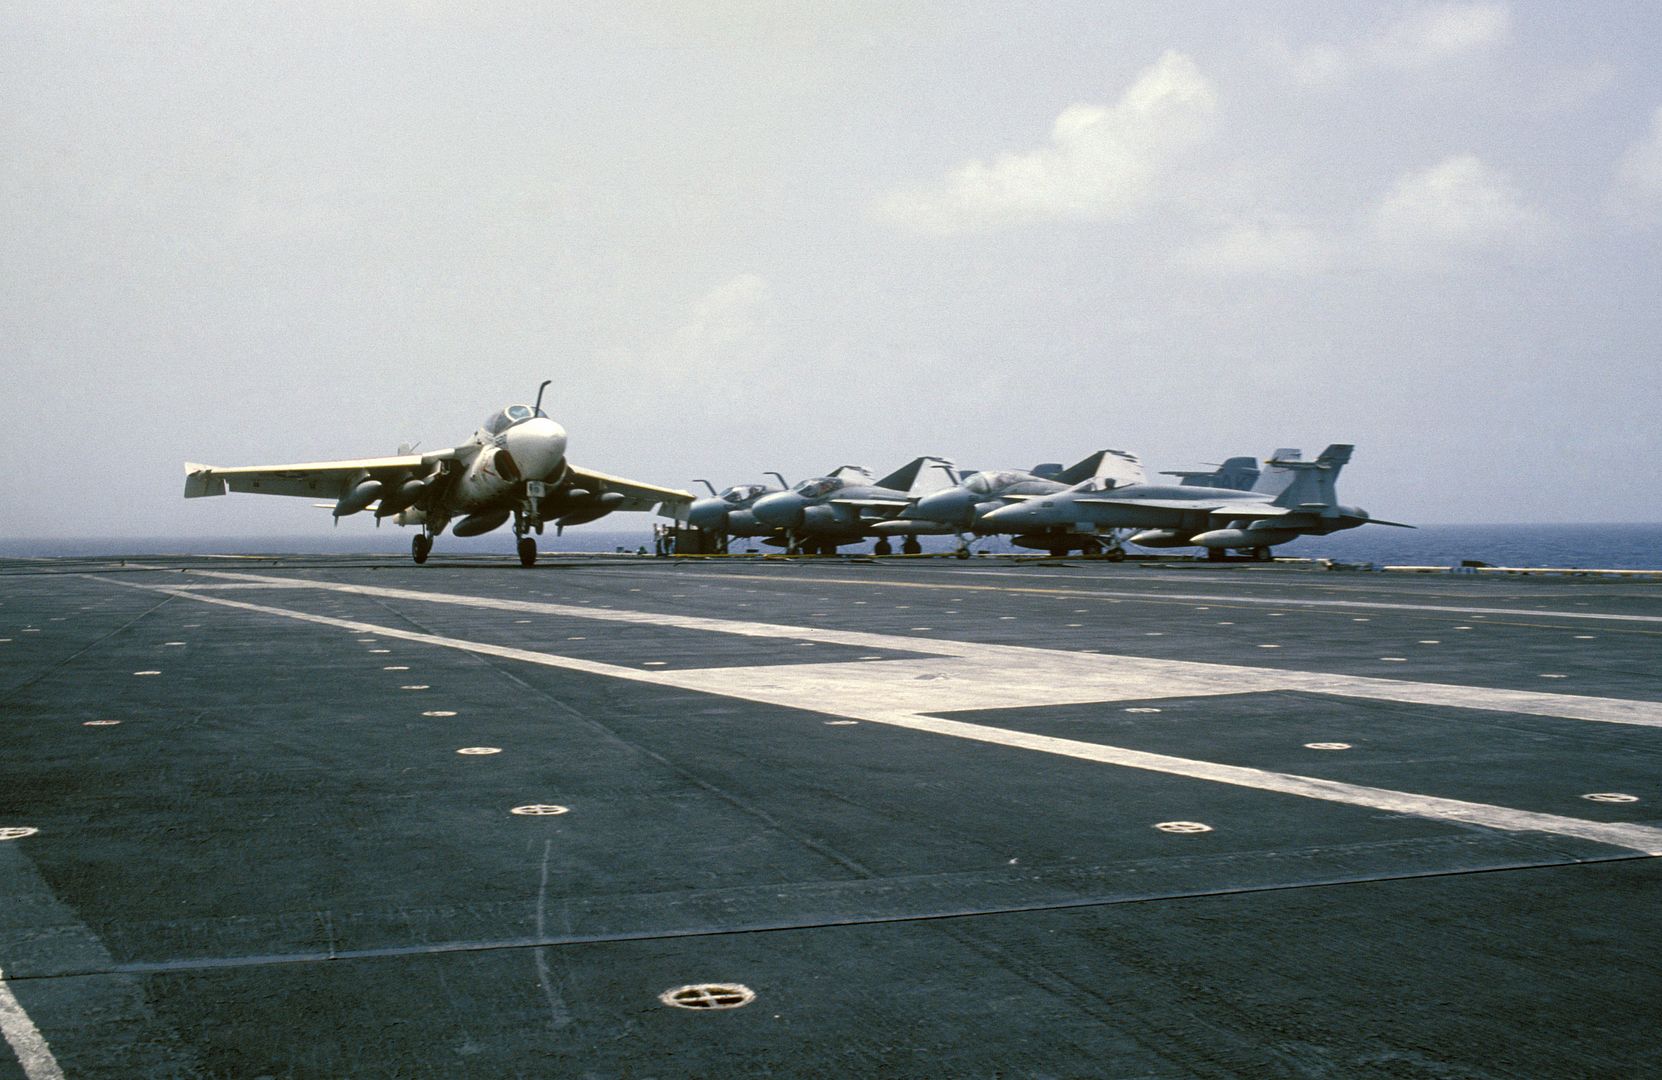  Parked At The Deck Edge Are Several A 6E Intruders And An FA 18A Hornet Aircraft